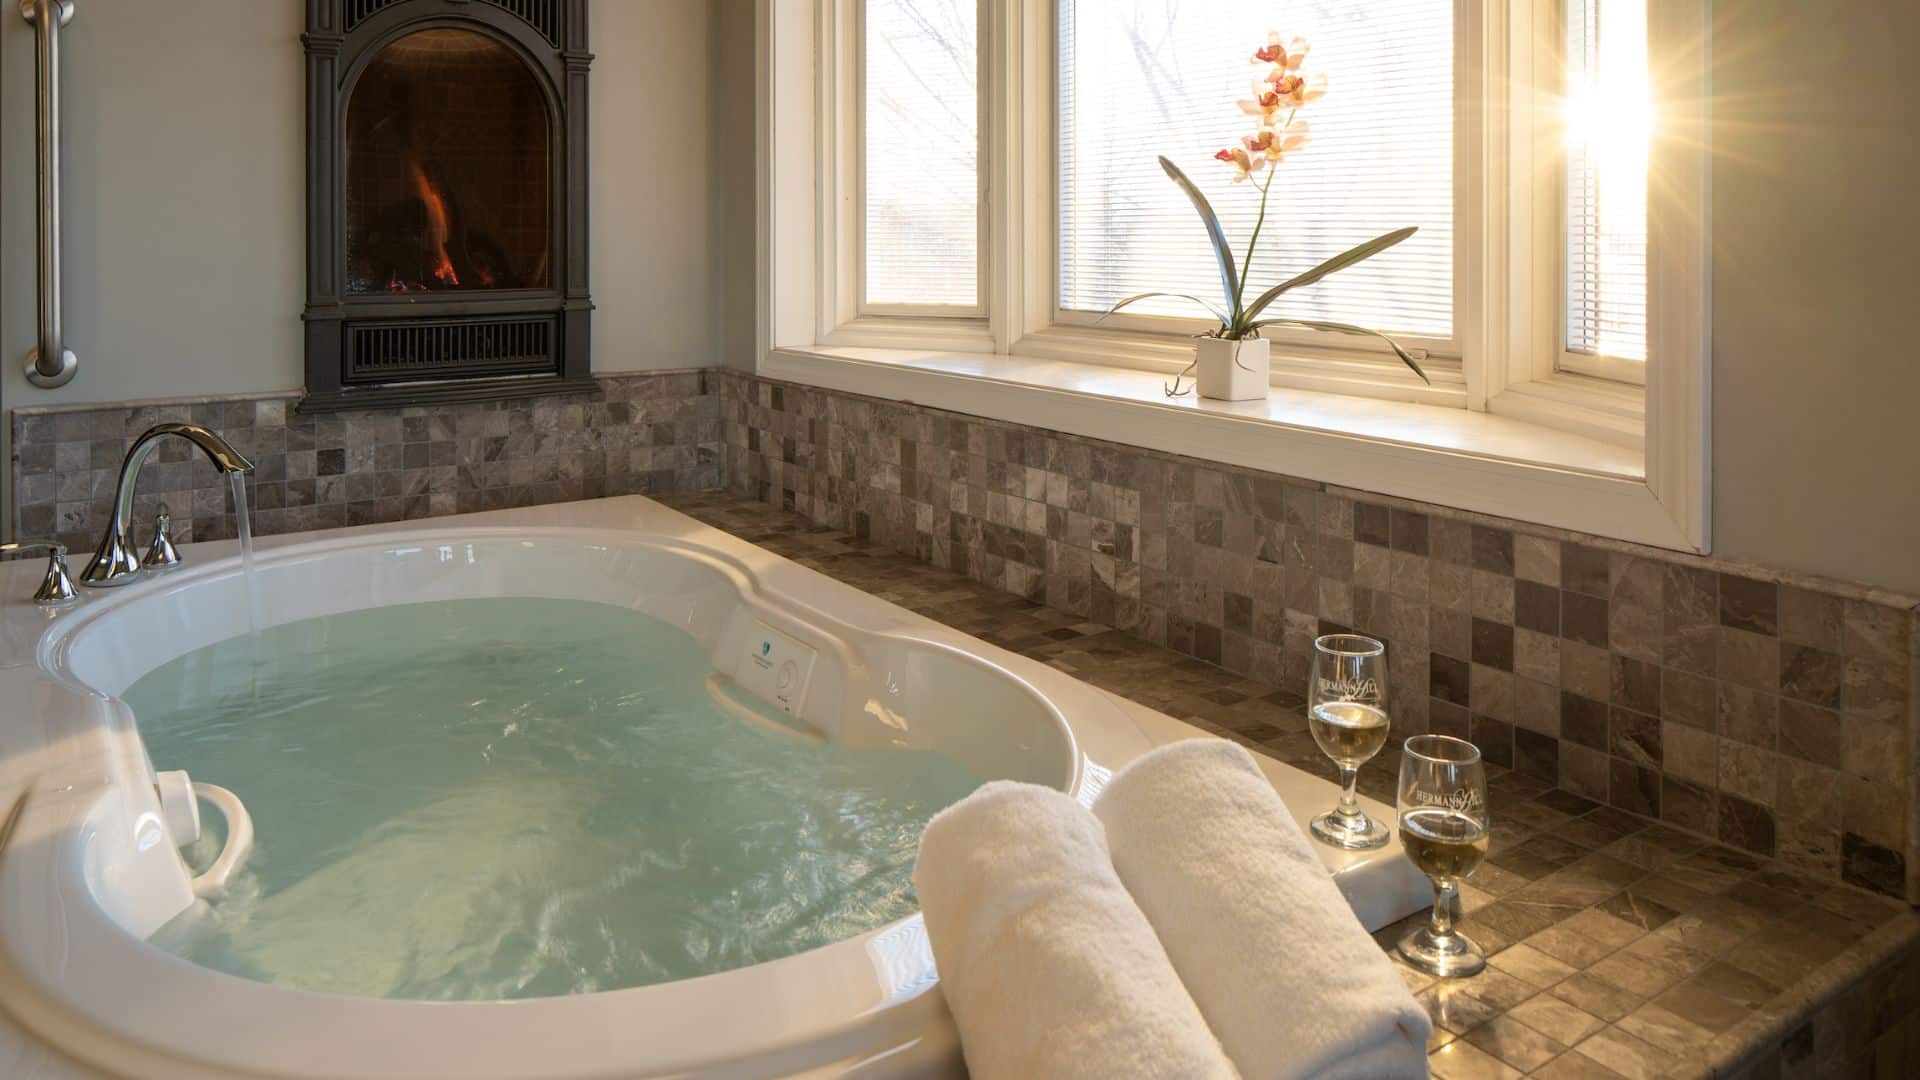 Jetted tub surrounded by tile, a bay window, a fireplace, and two wine glasses.